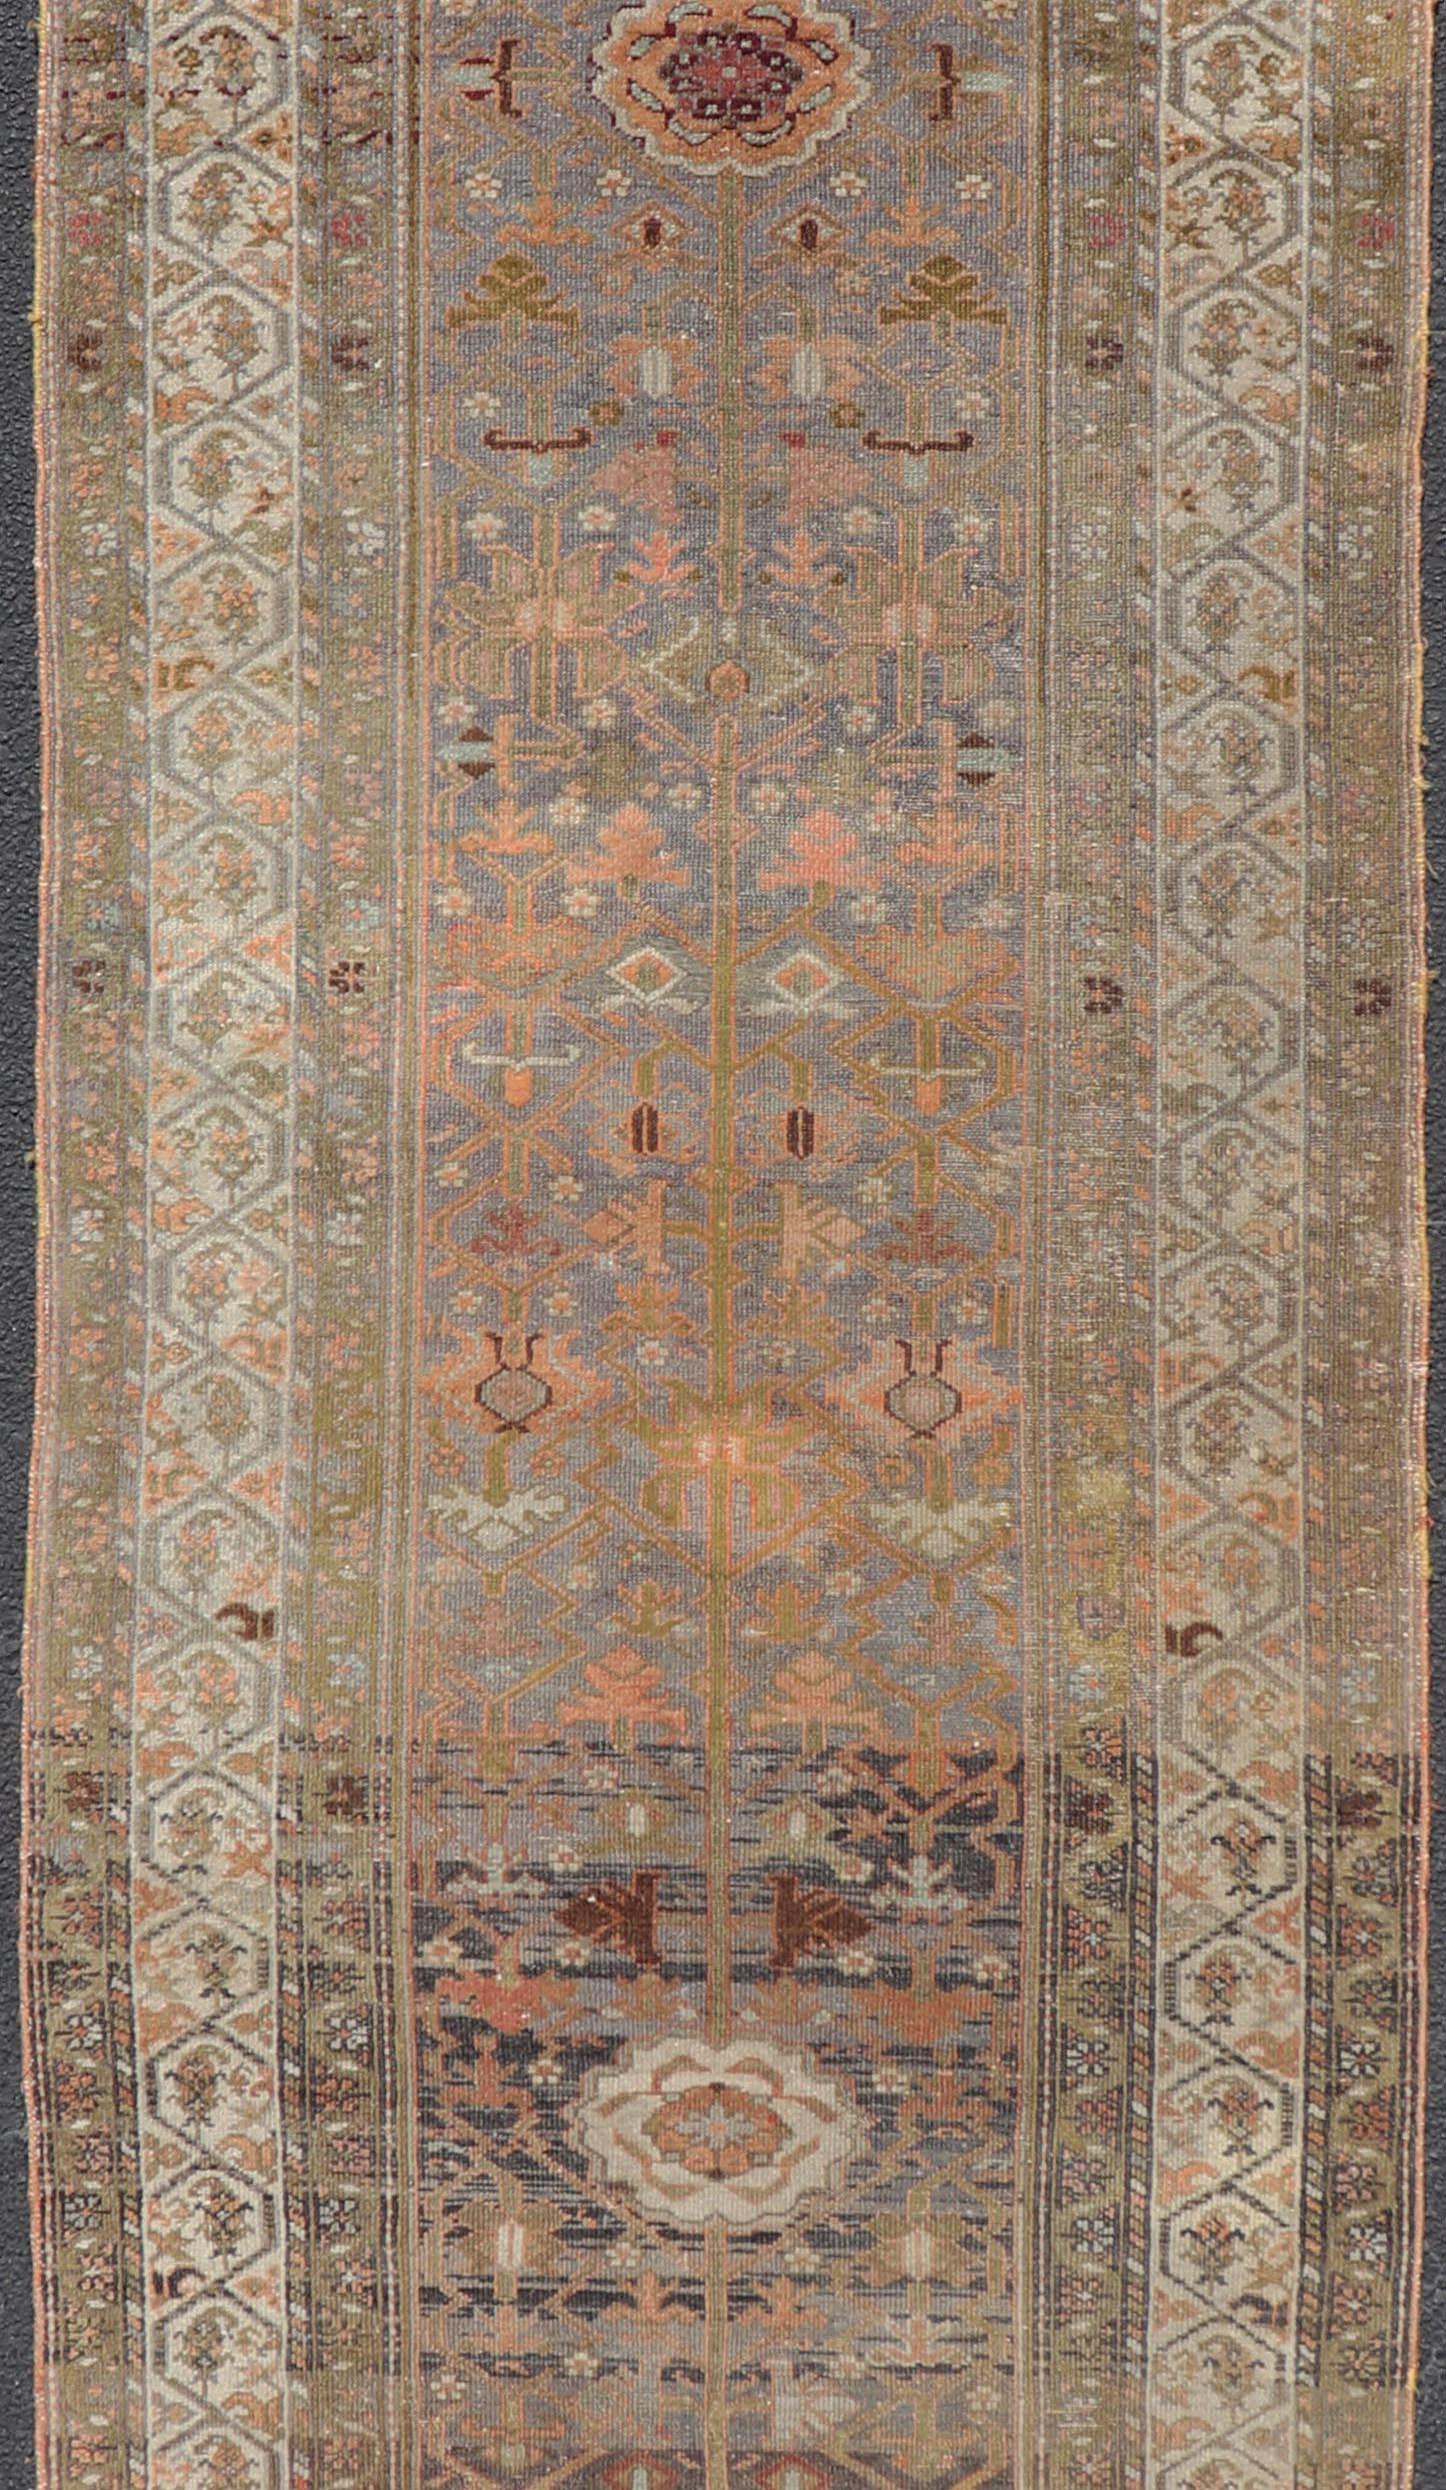 Distressed antique long Persian Malayer runner with all-over intricate floral design in multi-colors, rug R20-1109, country of origin / type: Iran / Malayer, circa 1910

Measures: 3'6 x 20'

This antique Persian Malayer runner, circa early 20th